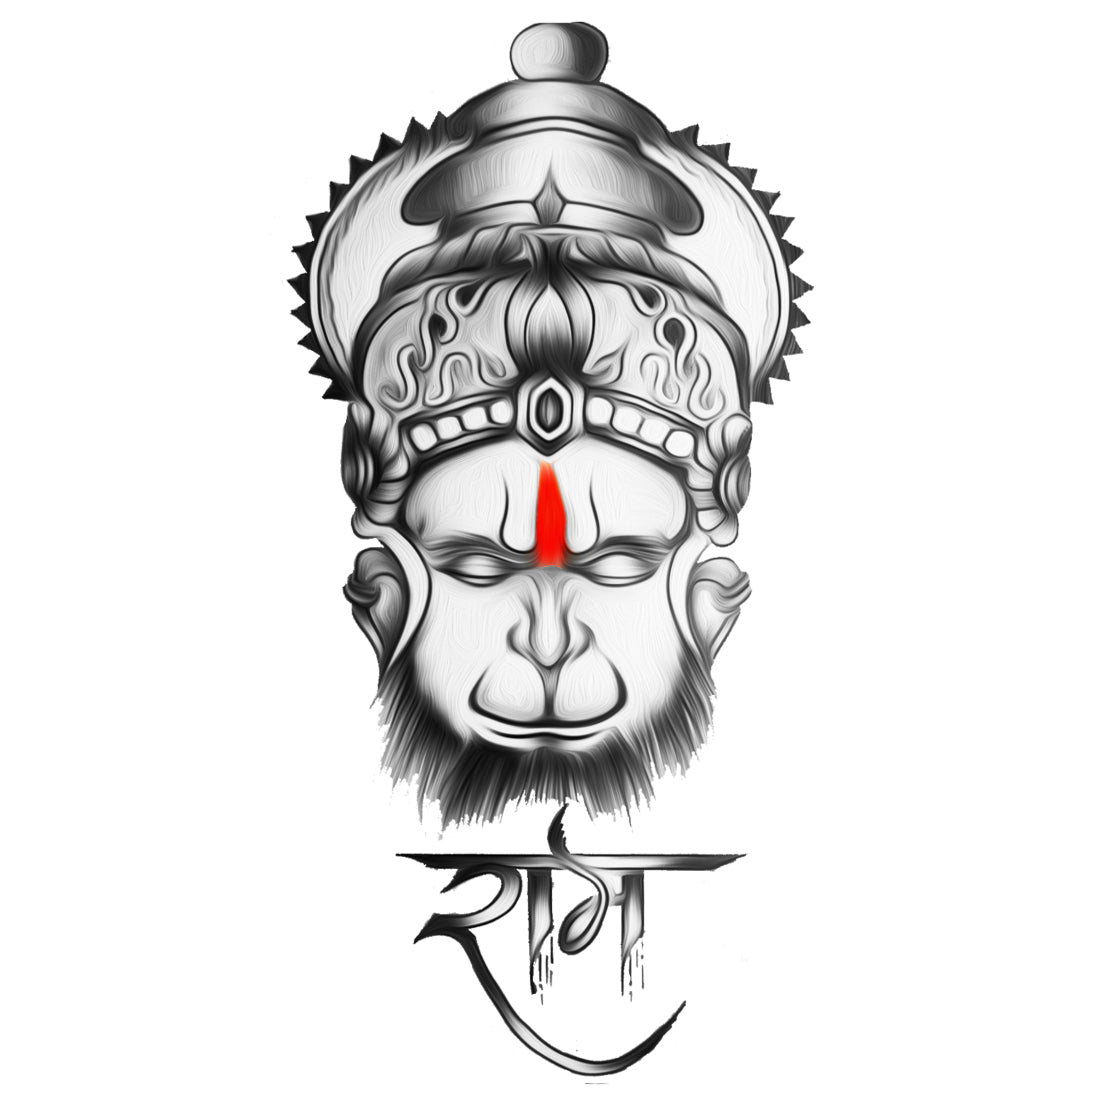 8 Hanuman Tattoo Designs for the Devoted and Brave